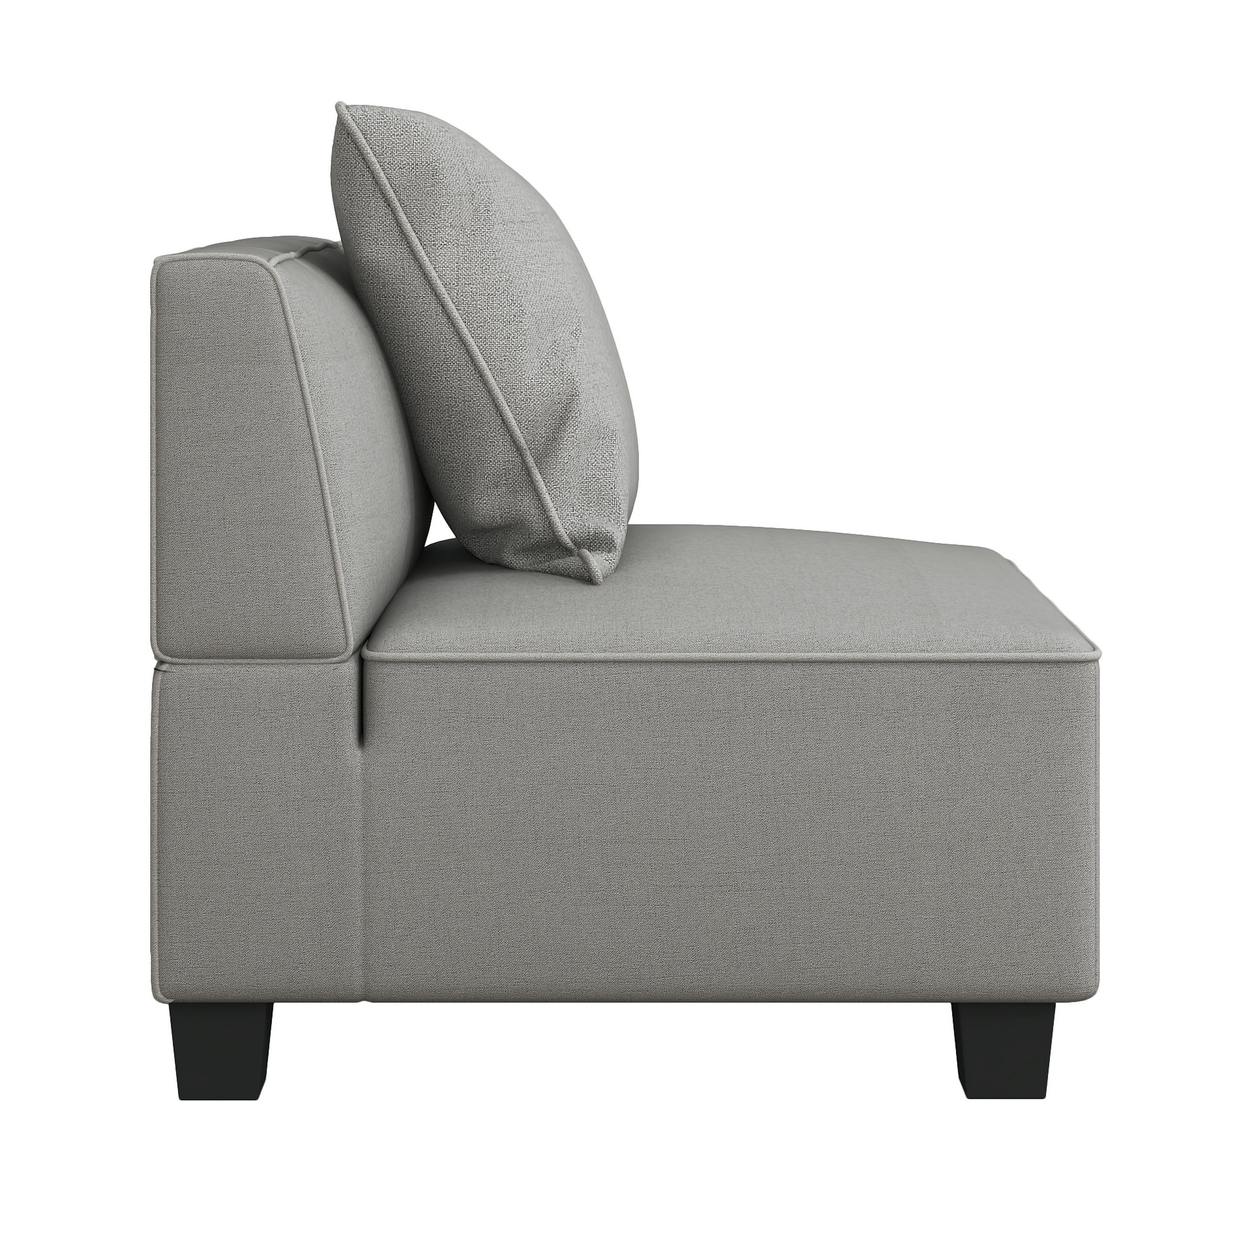 Jake 34 Inch Armless Chair, Gray Textured Polyester, Tapered Wooden Feet- Saltoro Sherpi